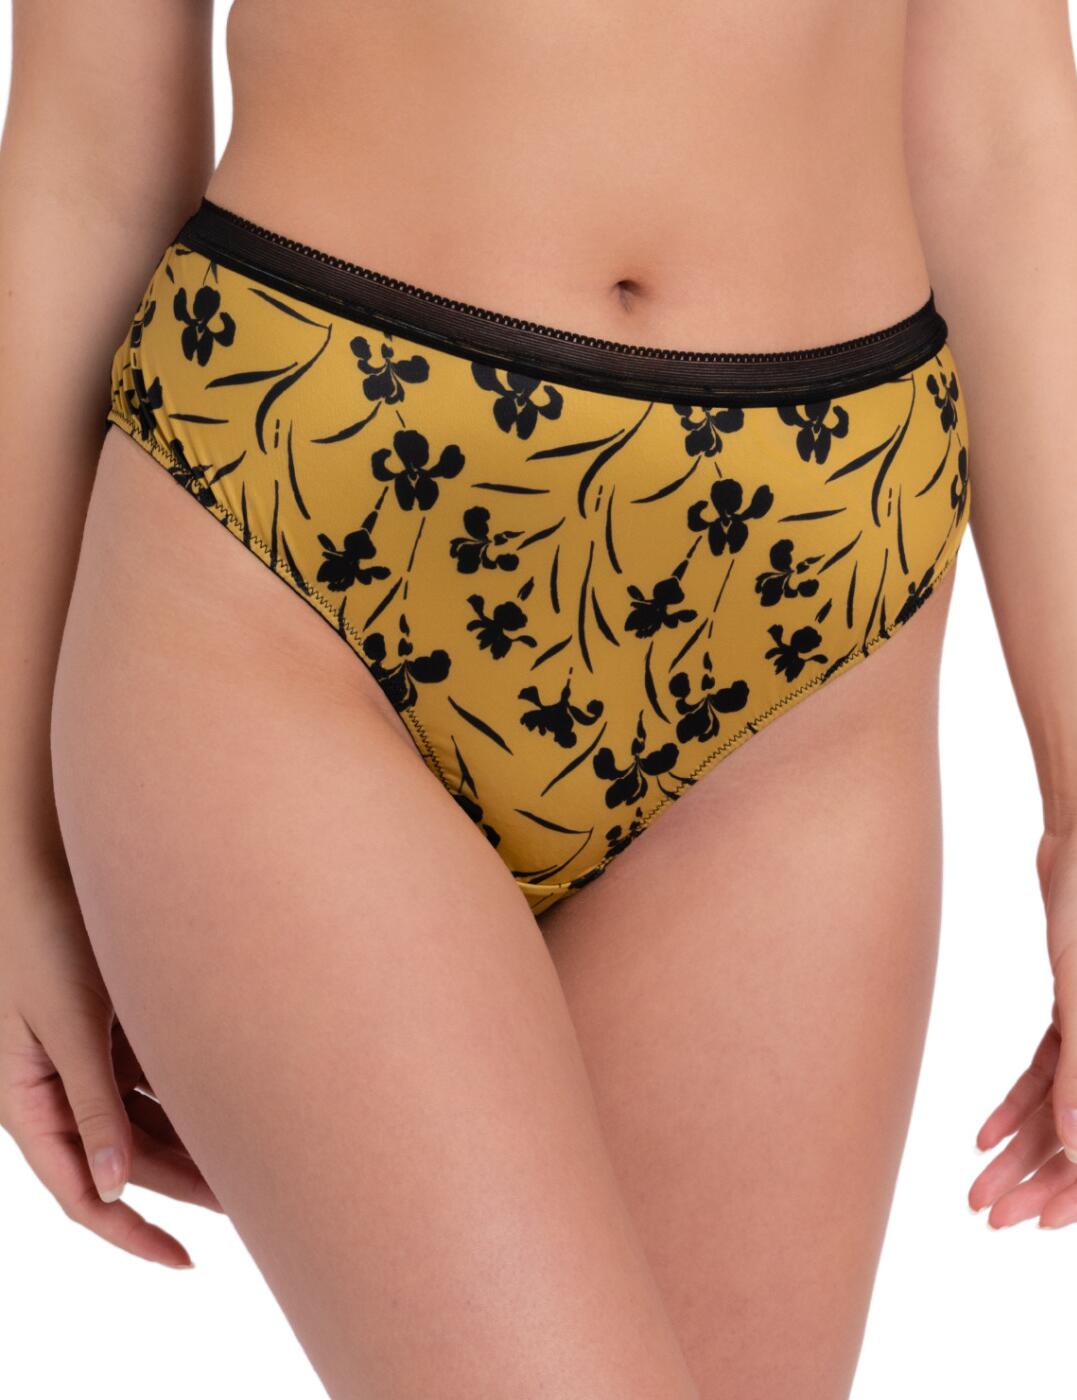 Scantilly by Curvy Kate lingerie set in ochre